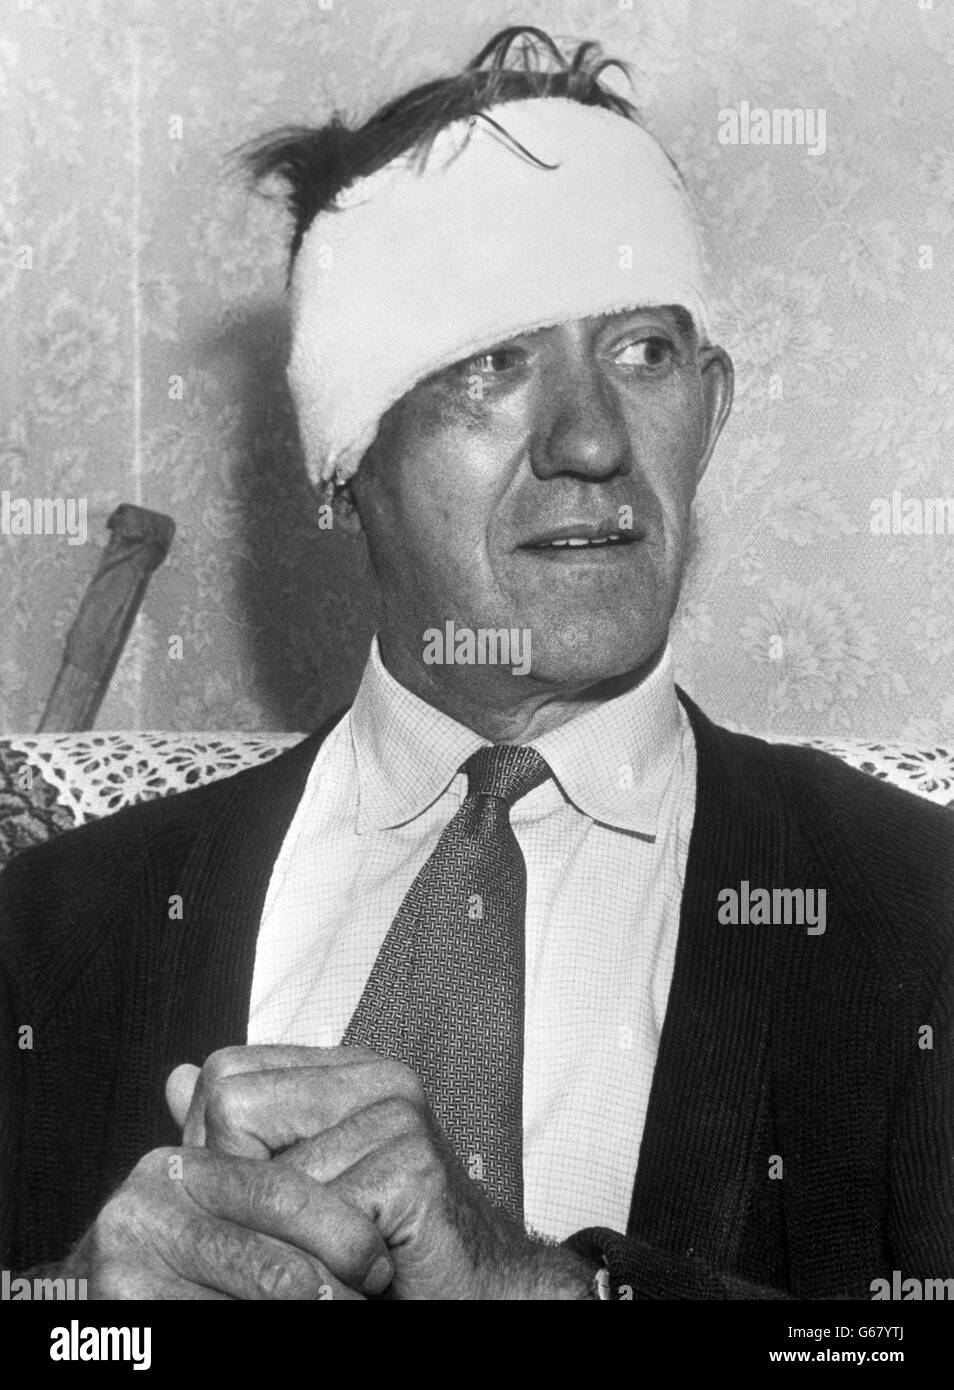 Jack Mills, 57, driver of the mail train hi-jacked by the Great Train Robbers, at his home in Newdigate, Crewe, after telling the Press the train robbery was like a military operation. Mills, whose head was heavily bandaged after been injured in the robbery, spent three days in hospital before returning home. Stock Photo